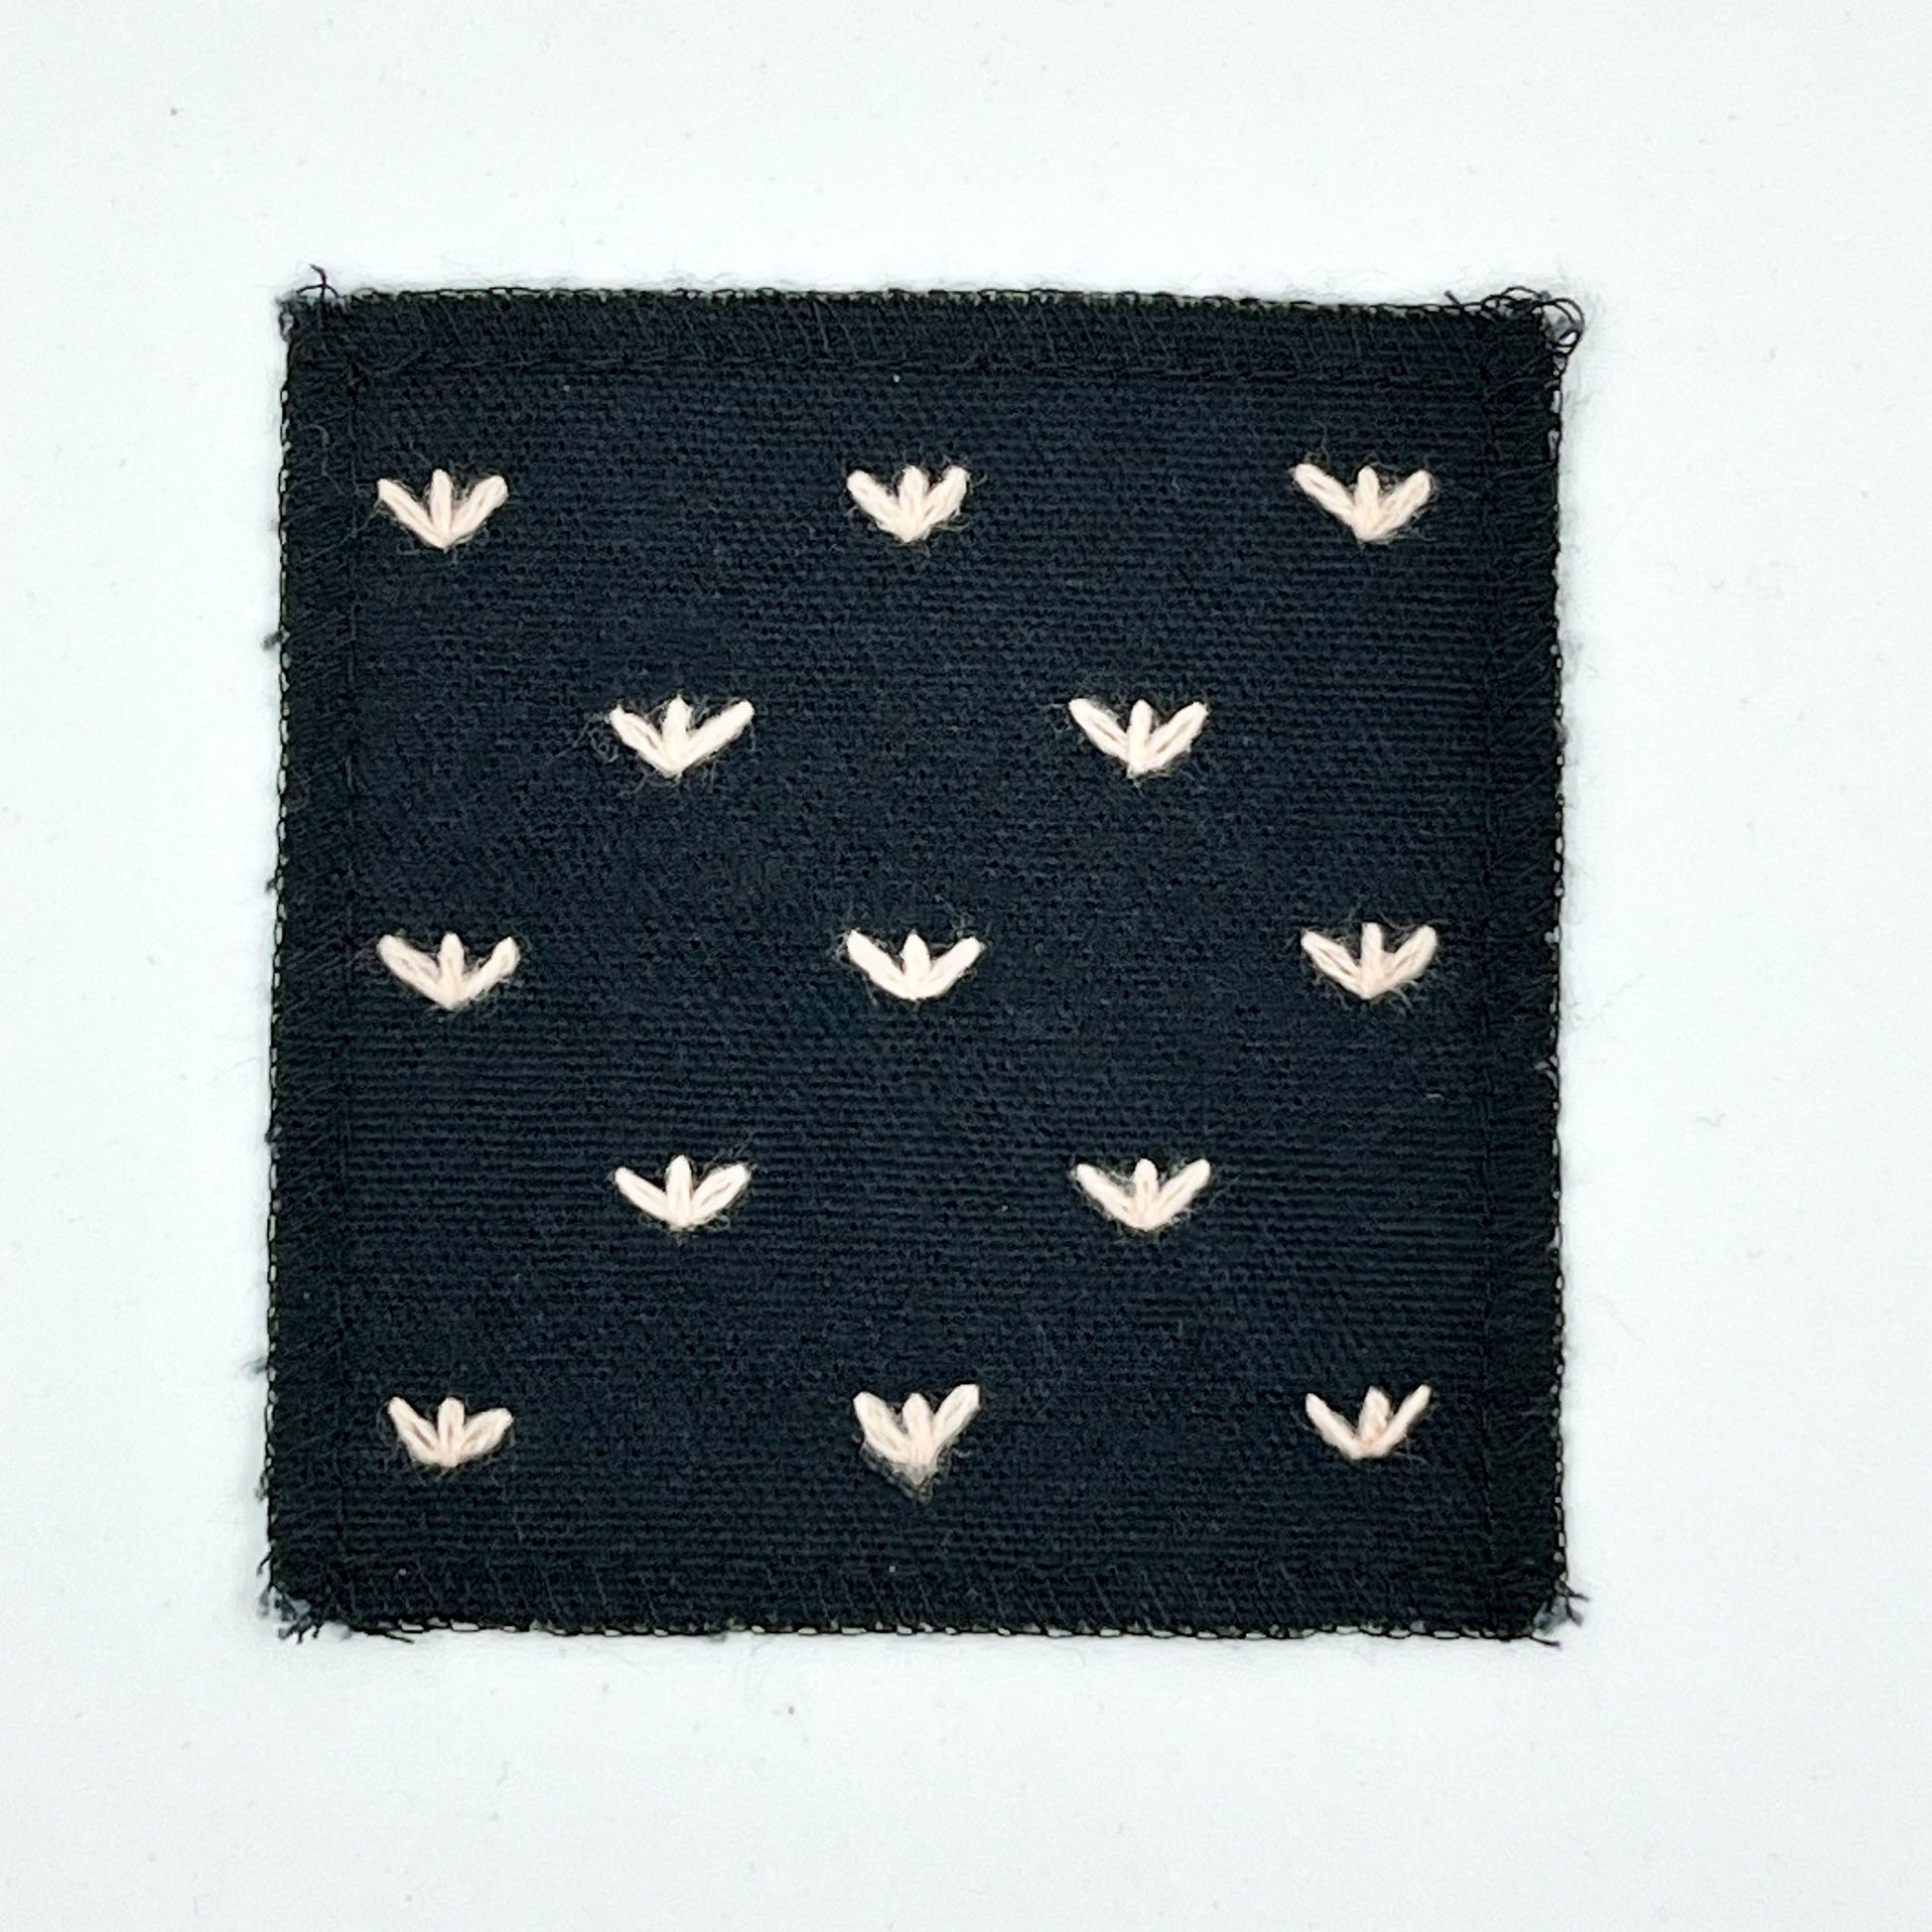 a square black canvas patch, with peach stitches that look like birds feet or sprouts spread out in a diamond pattern, with overlocked edges, on a white background